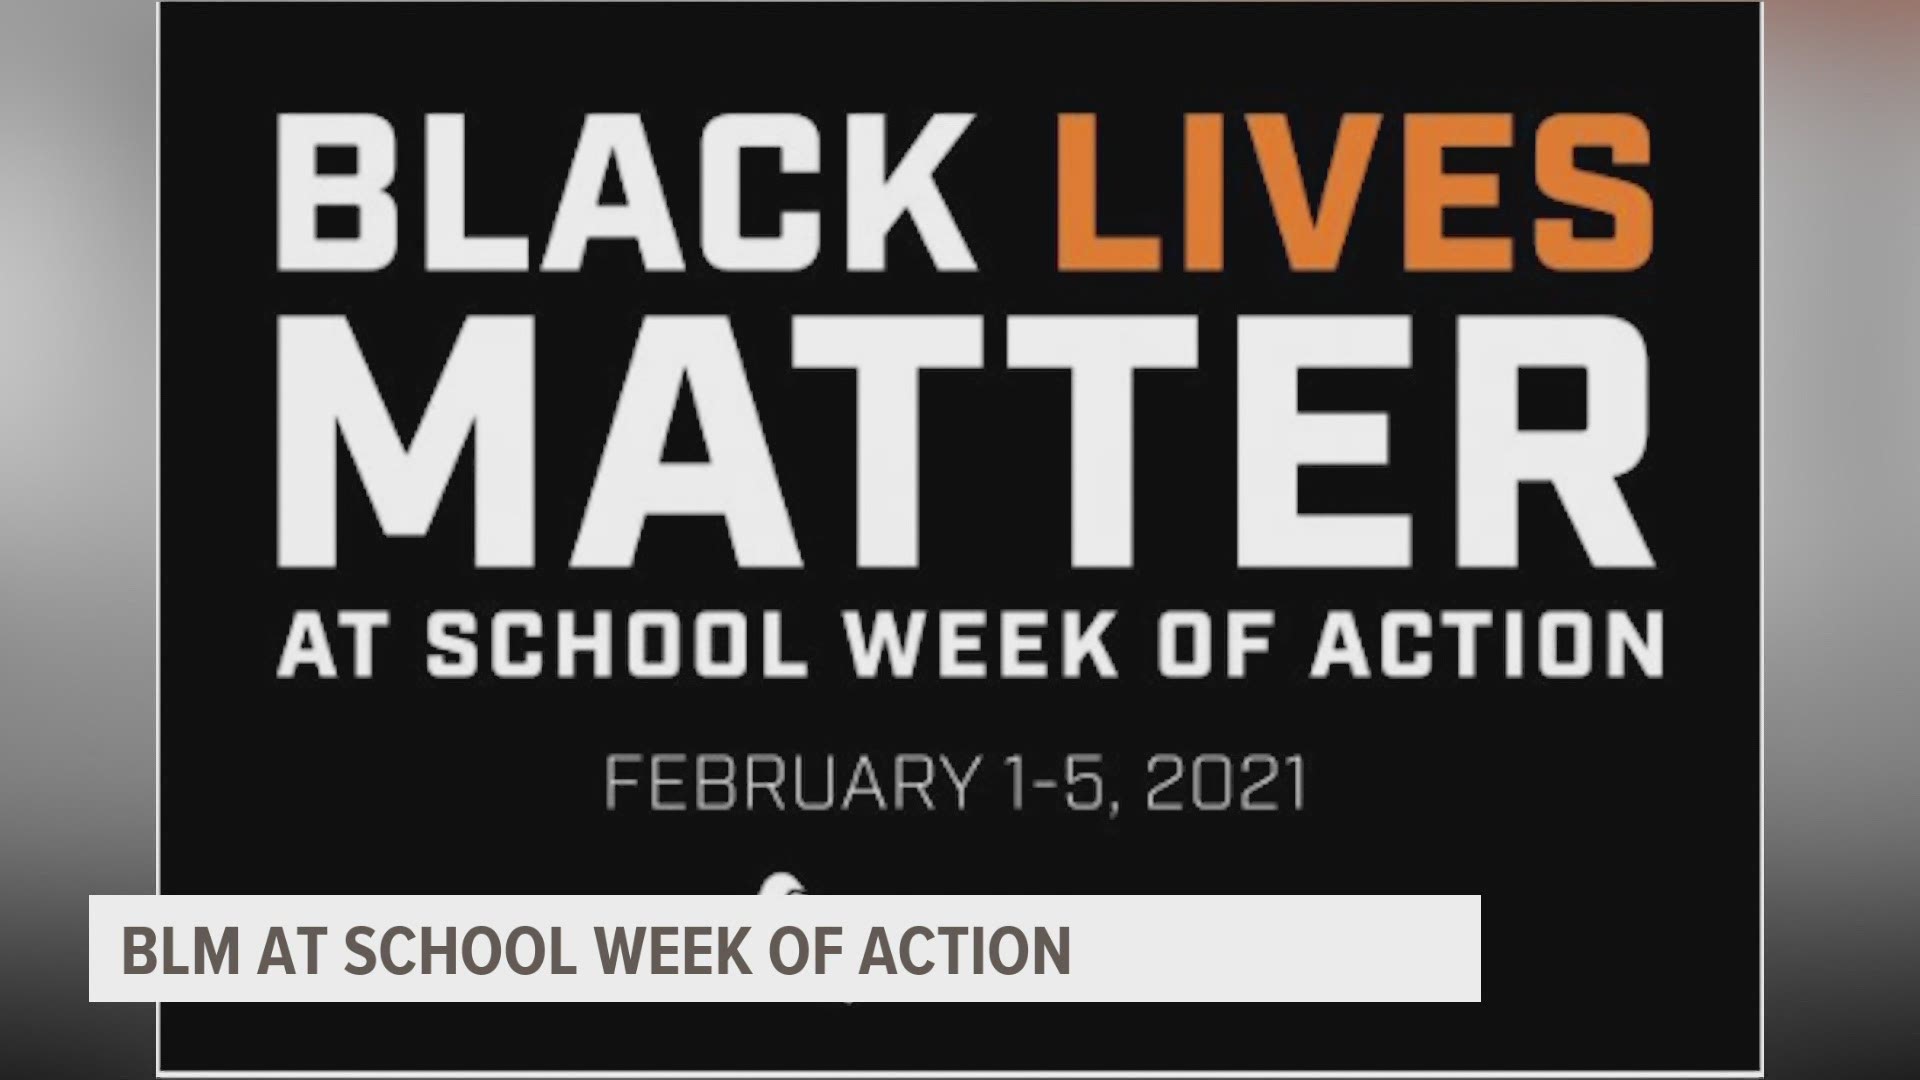 During the first week of February, students in Ames schools will be taught different principles that help show Black lives matter within schools.